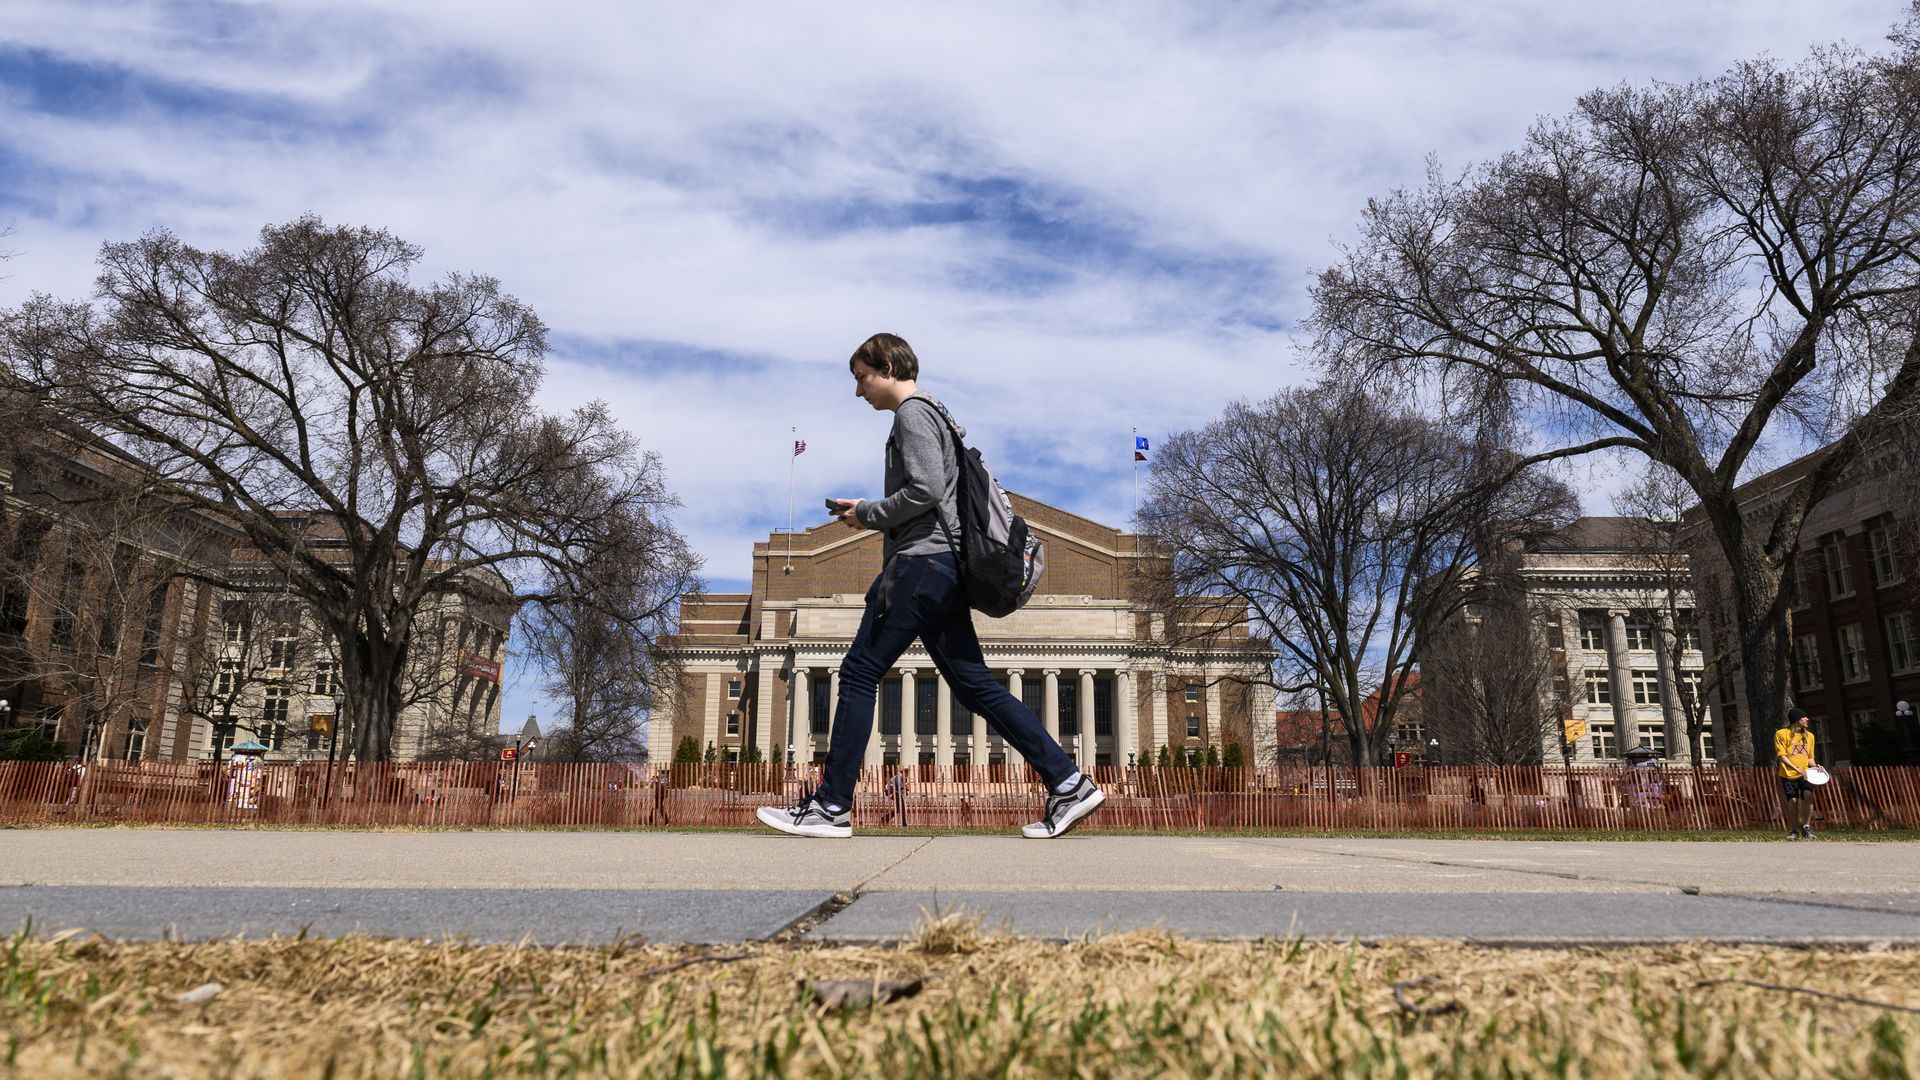 A student in a gray long-sleeved shirt and sneakers walks across a college campus with a red-brown brick building and columns in the background.